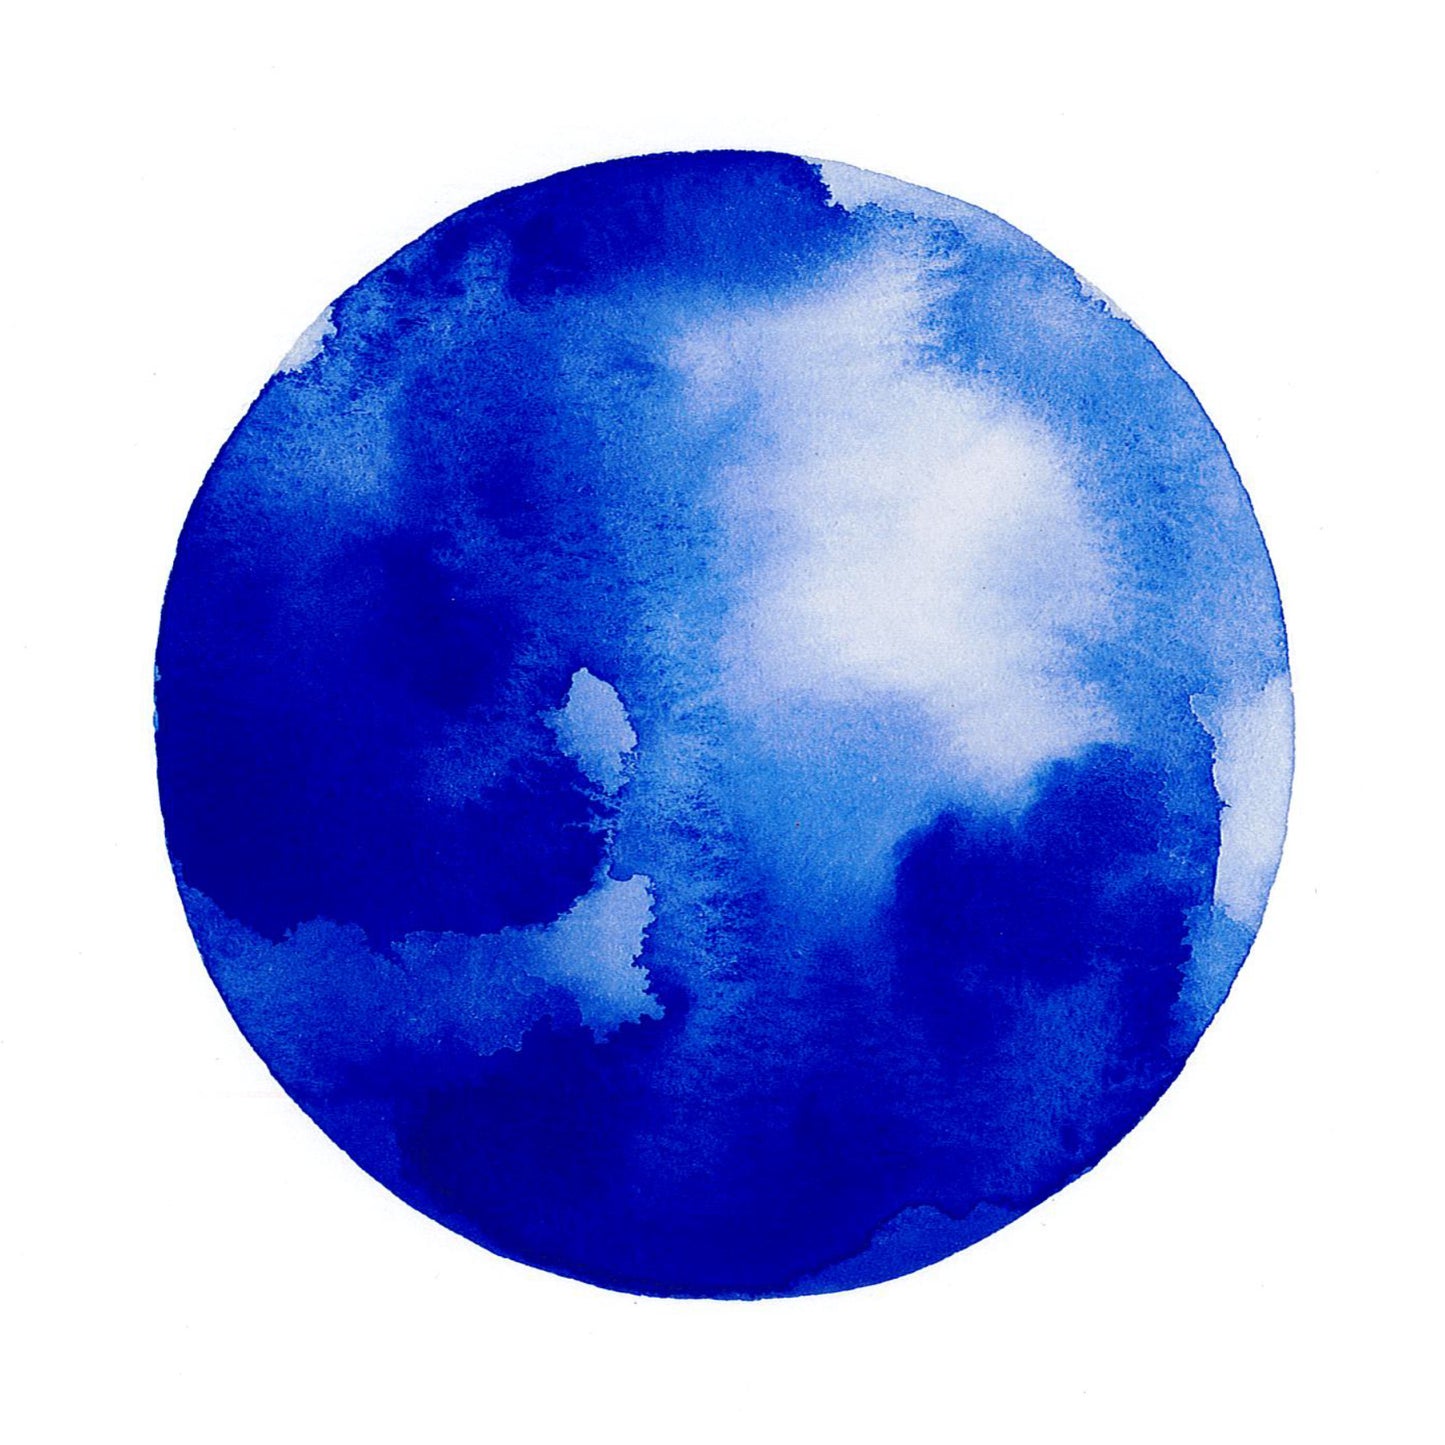 04/21 - Watercolor Moons with Amelia Morton 5pm - 7pm